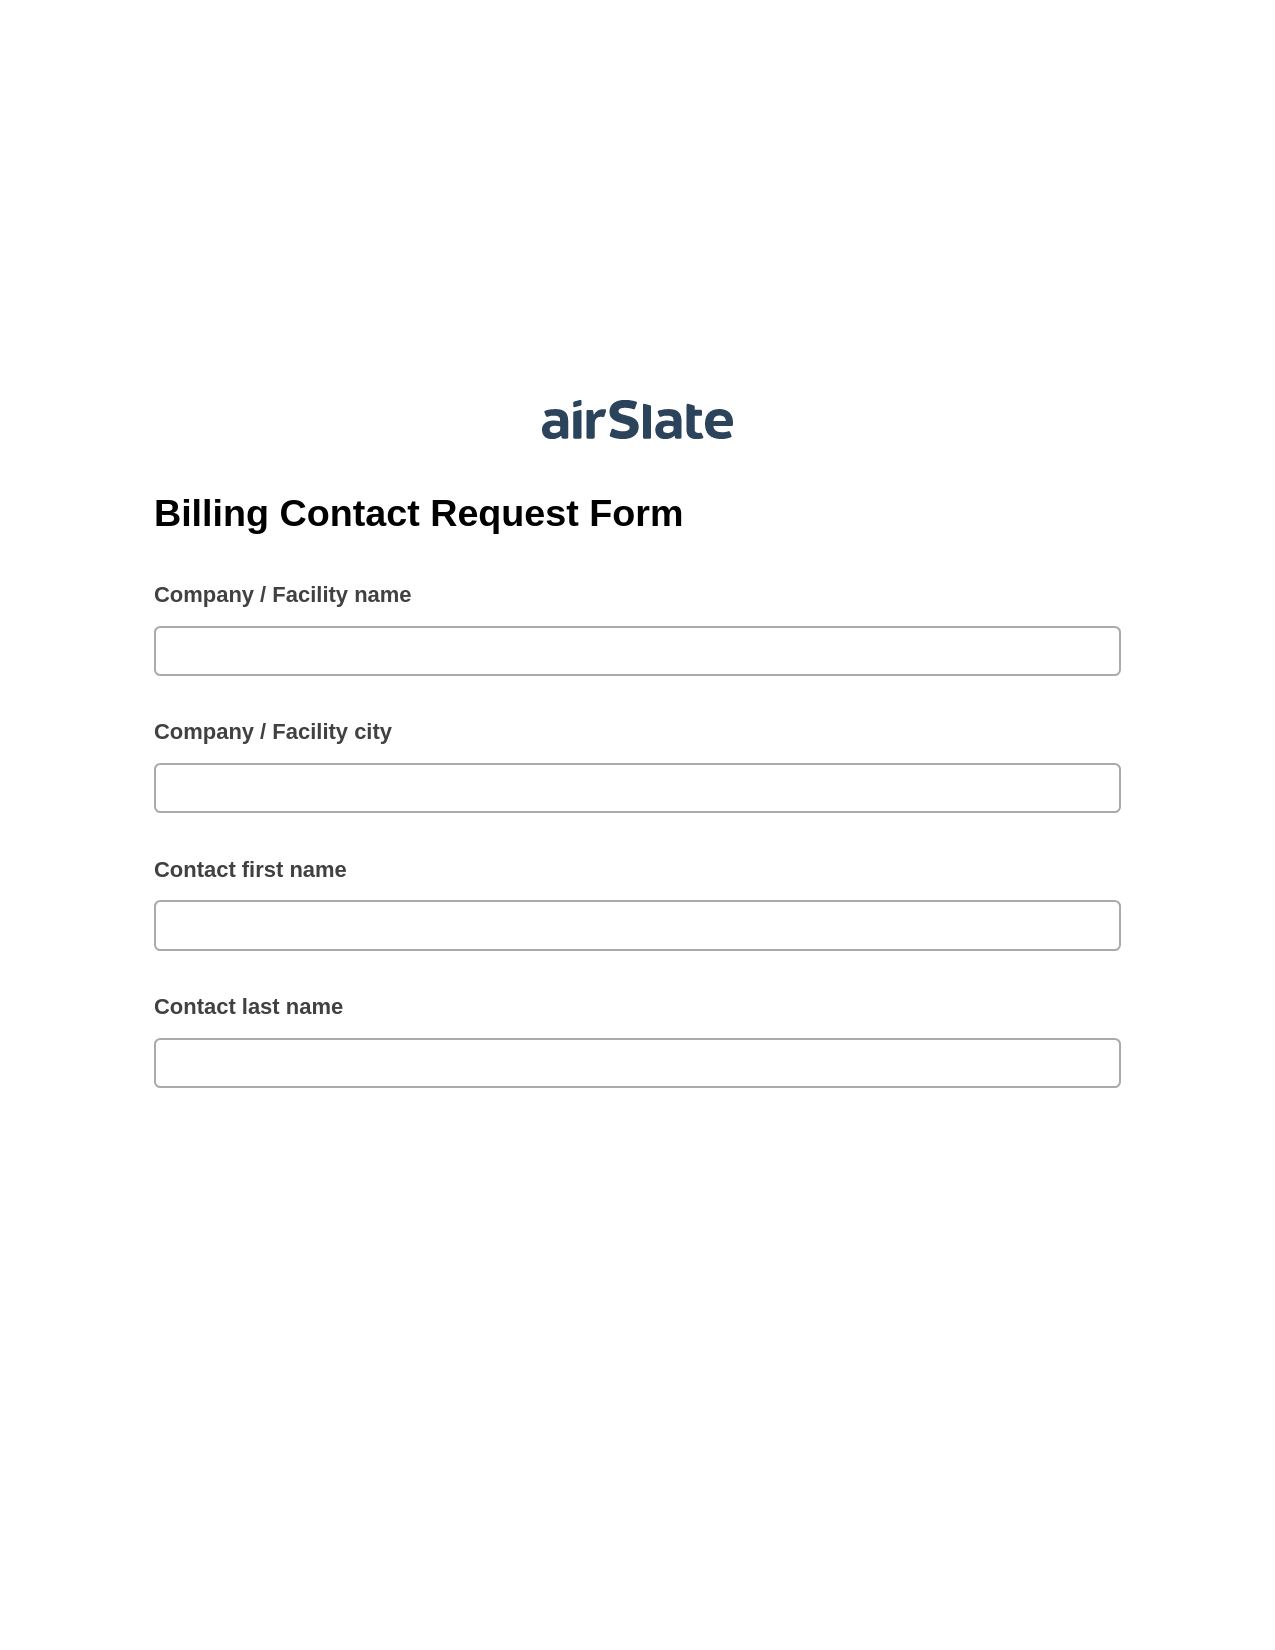 Billing Contact Request Form Pre-fill from Salesforce Record Bot, Update MS Dynamics 365 Records Bot, Export to NetSuite Record Bot